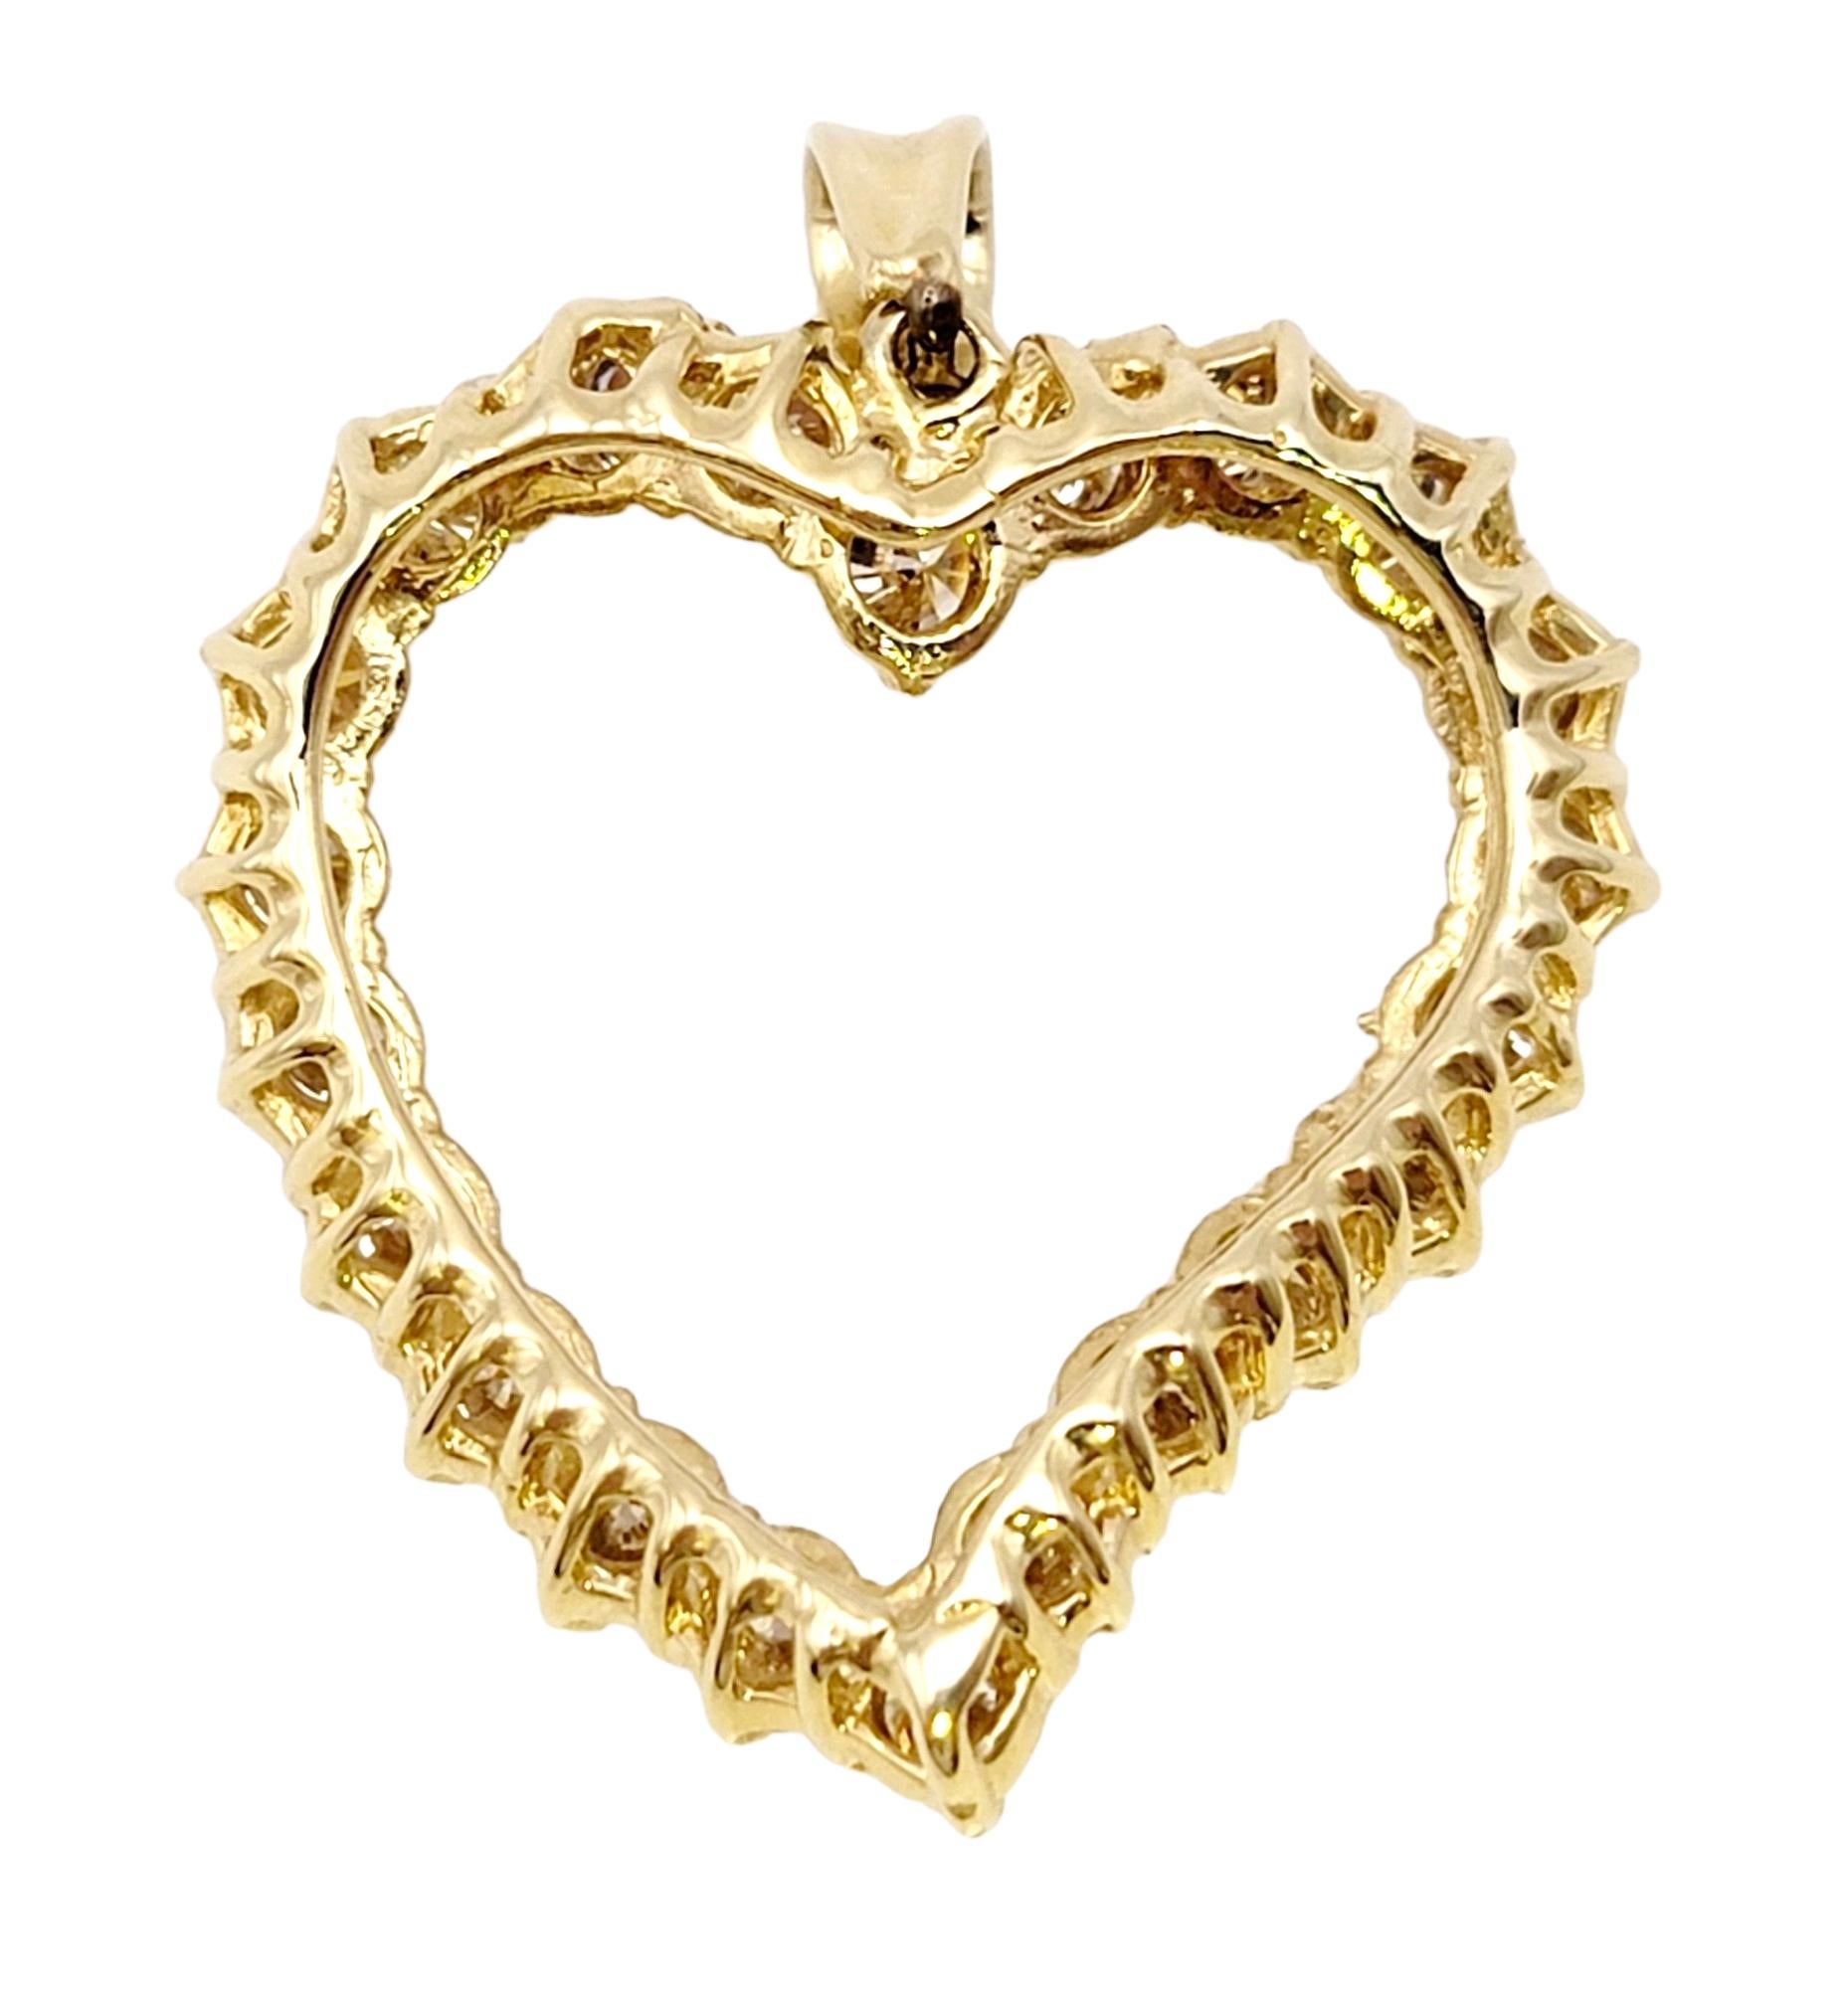 4.25 Carats Champagne Diamond Curved Open Heart Pendant in 14 Karat Yellow Gold 3